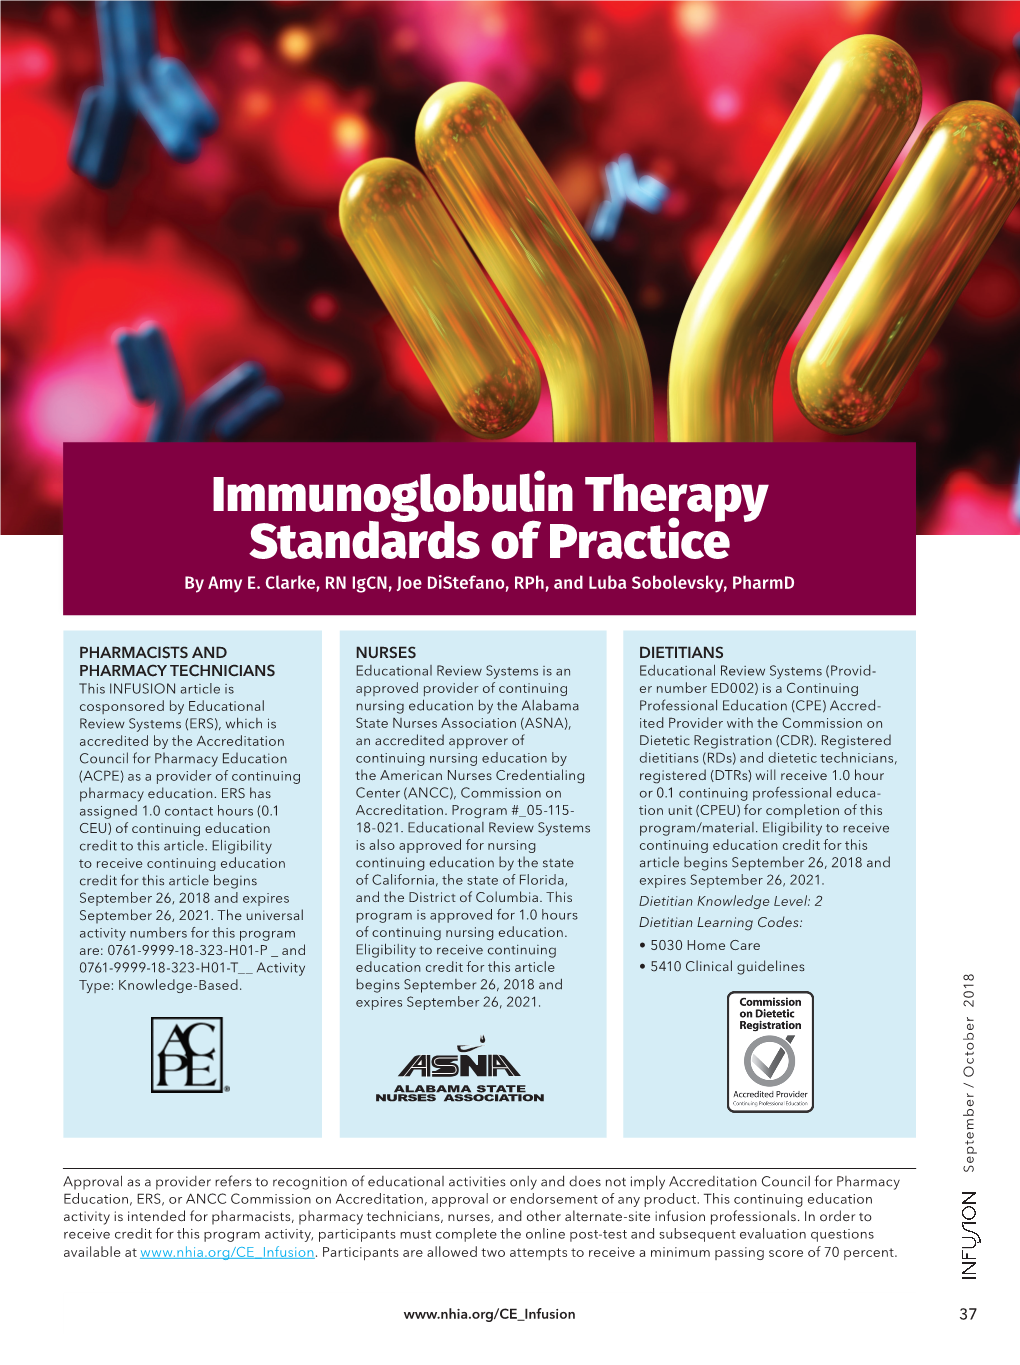 Immunoglobulin Therapy Standards of Practice by Amy E